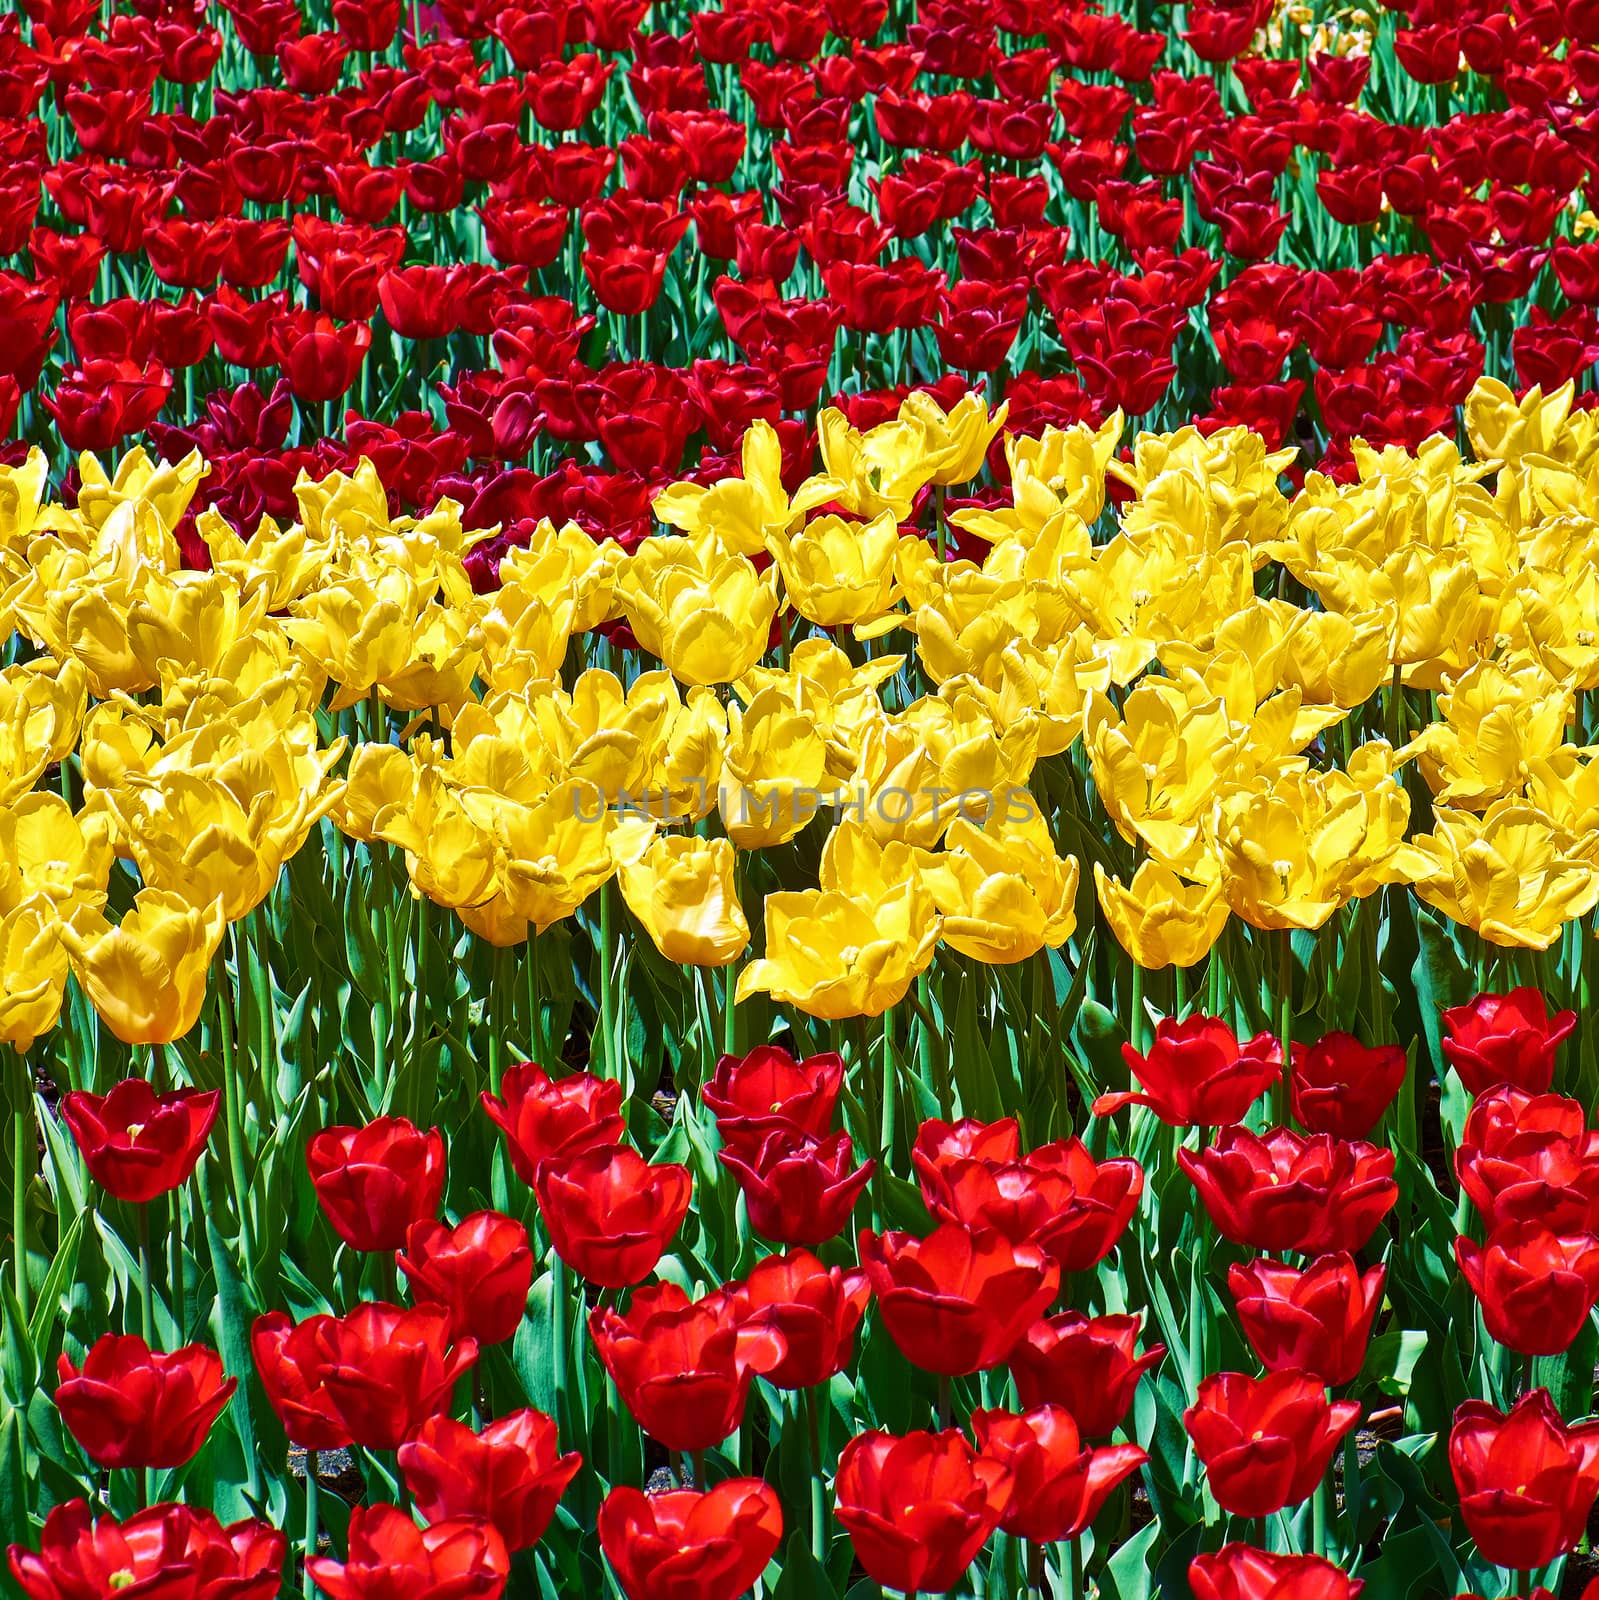 Red and yellow tulips by leventina